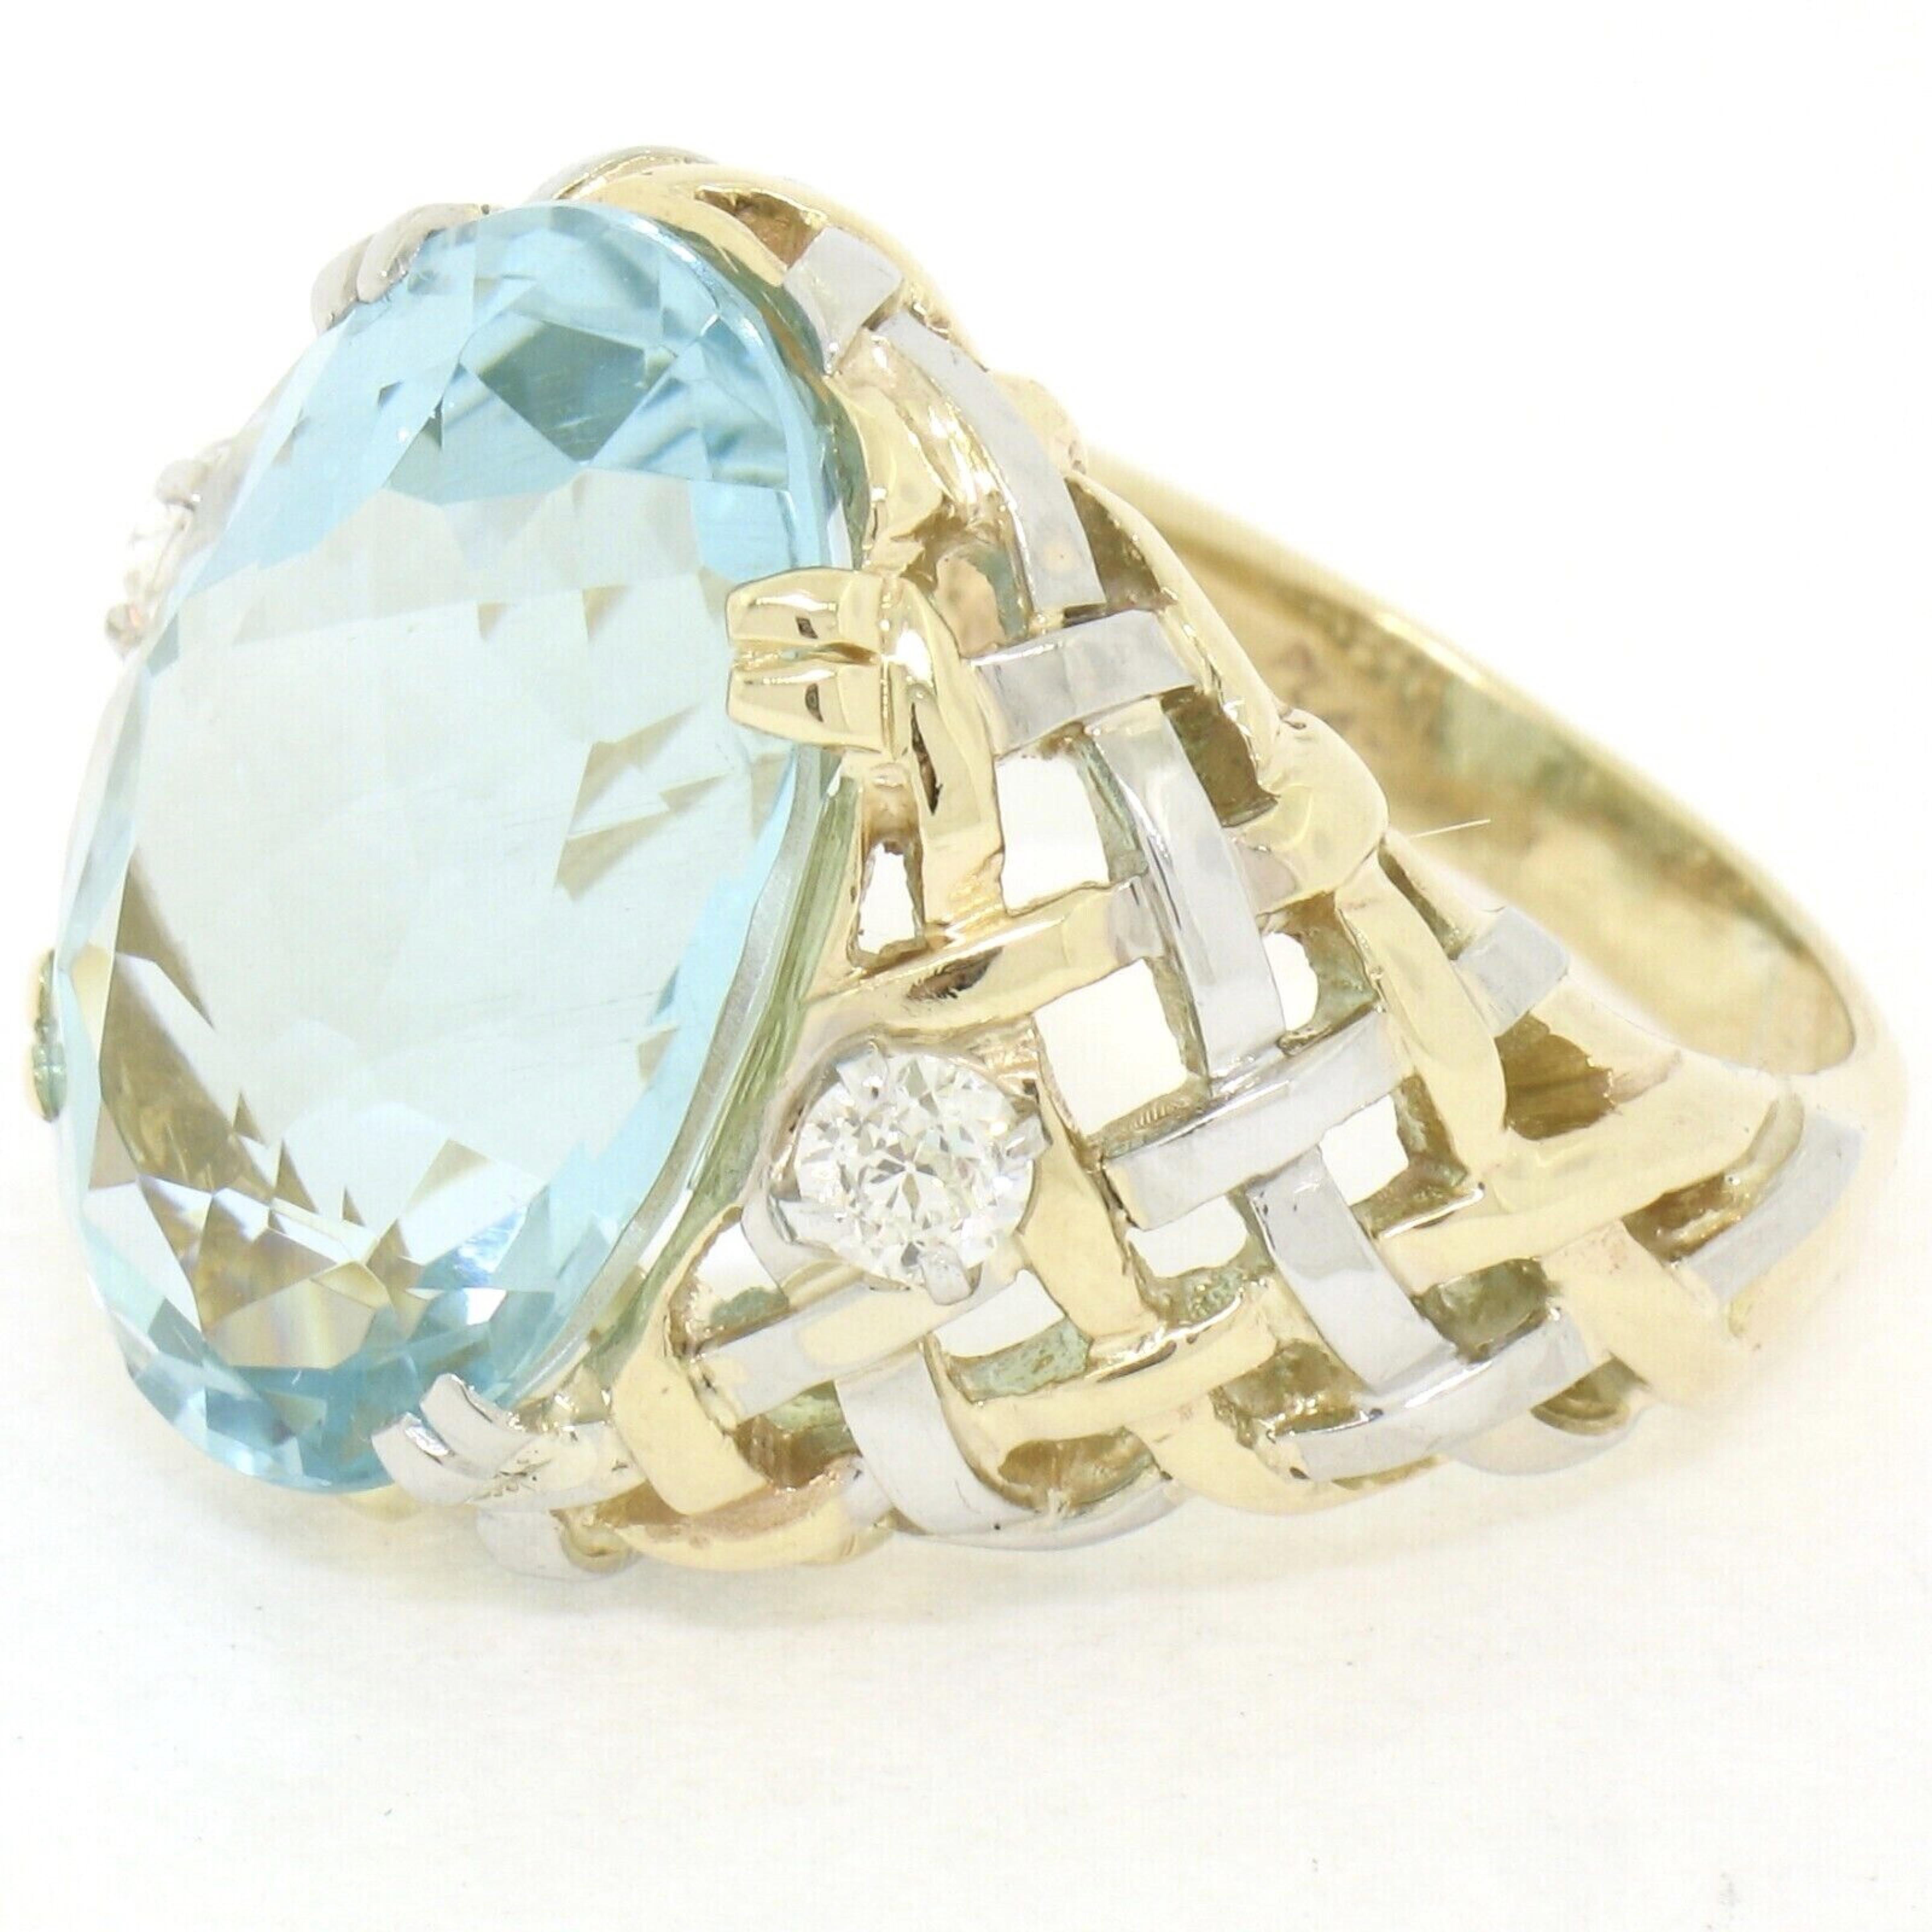 Up for sale we have an absolutely stunning, large, aquamarine and diamond cocktail ring. The aquamarine is a large oval brilliant cut stone, 19.13 carats in weight, with the most outstandingly rich and soothing greenish blue color. Accenting the